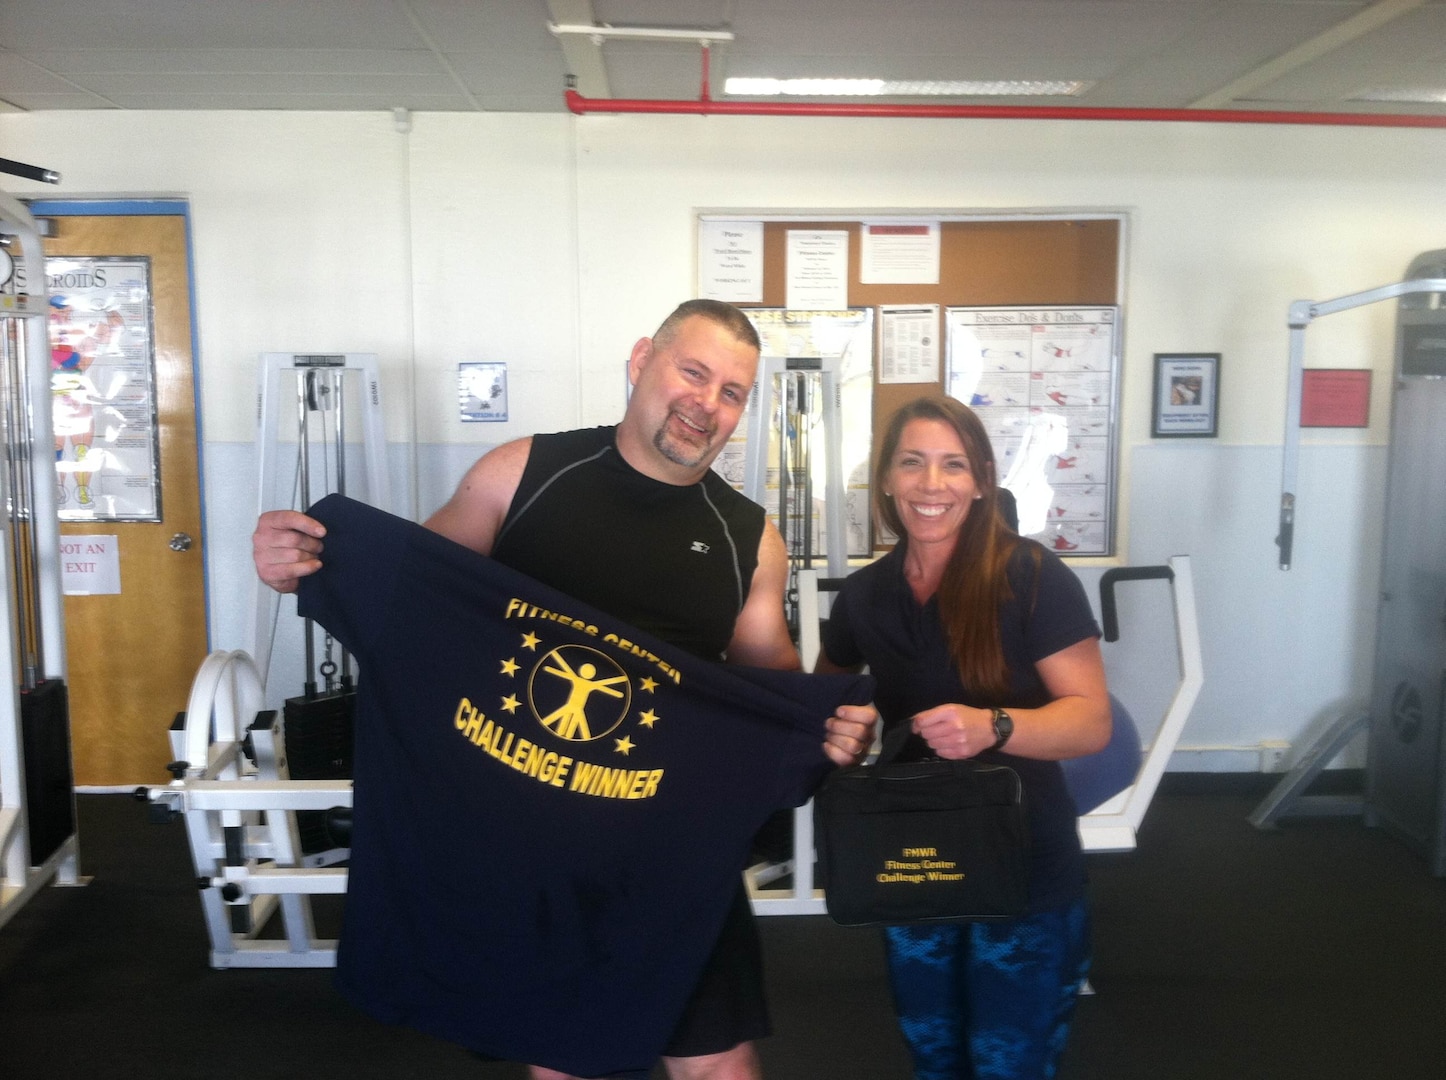 Steve Edmonson, DLA Distribution San Joaquin Maintenance Division Group deputy, is announced as the winner of the Fitness Center Challenge by trainer Jessica Sanchez.